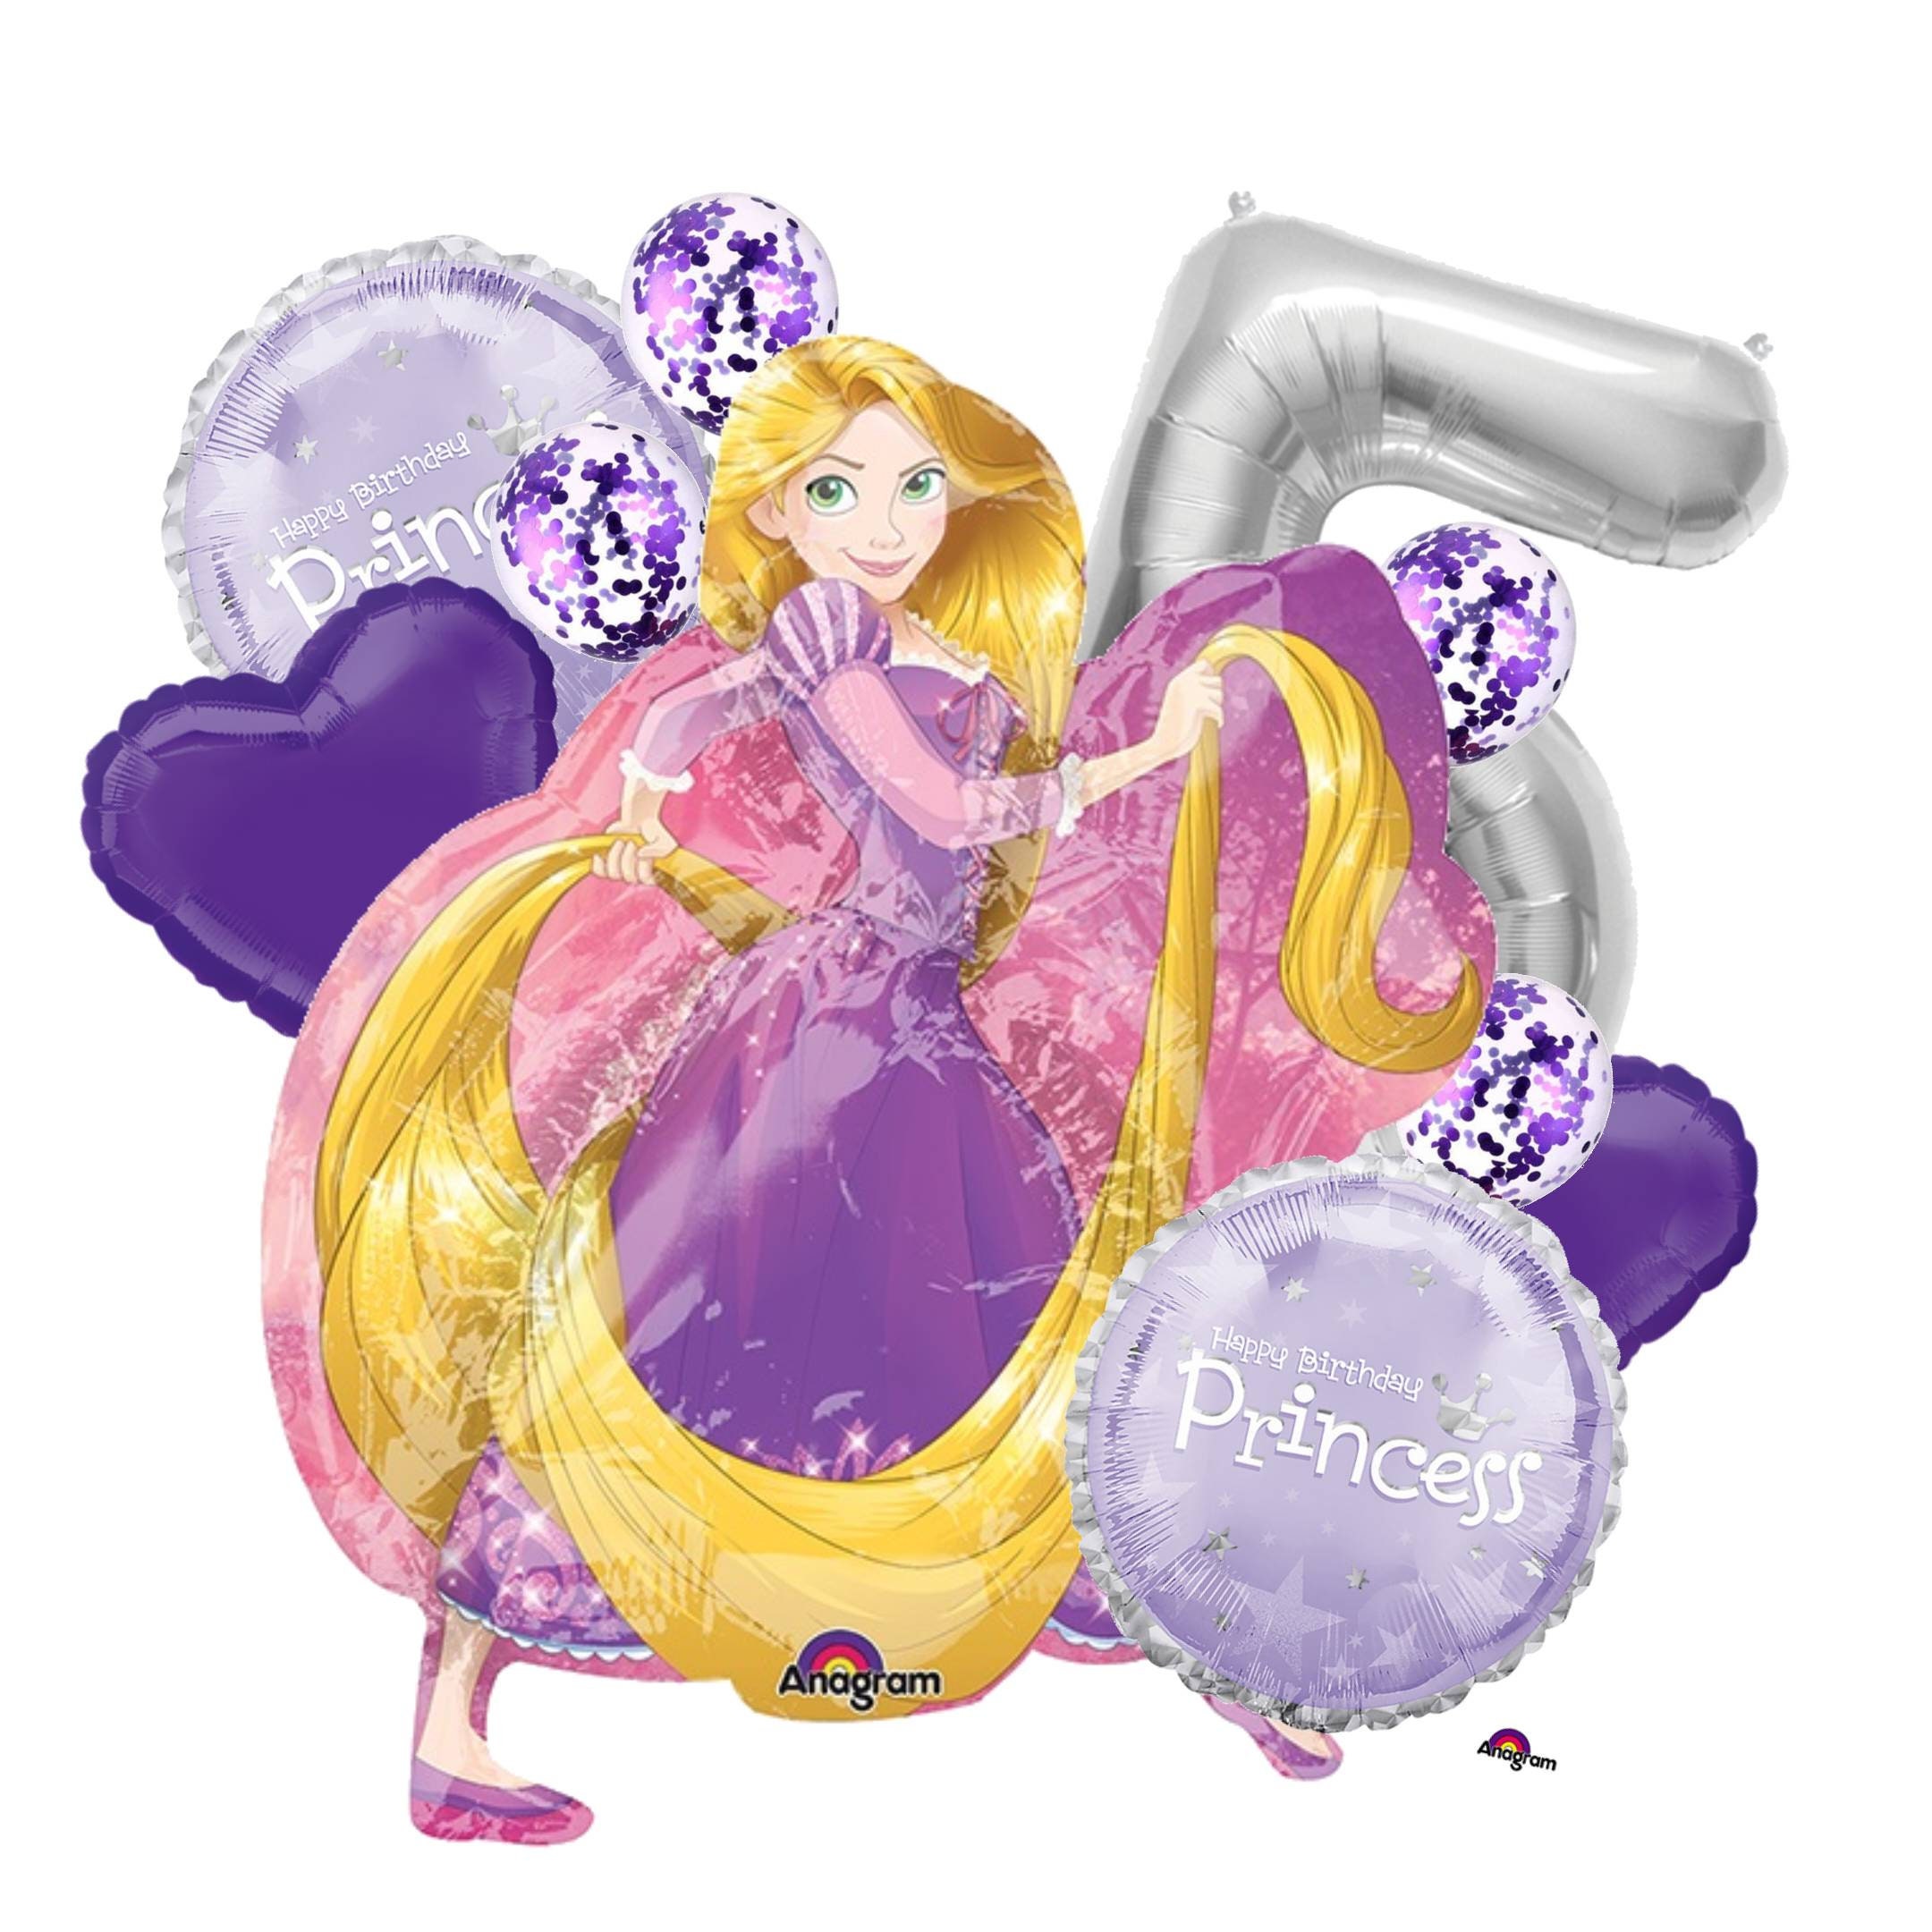 Pascal & Deluxe Large Tangled-themed Boat Centerpieces -  Israel